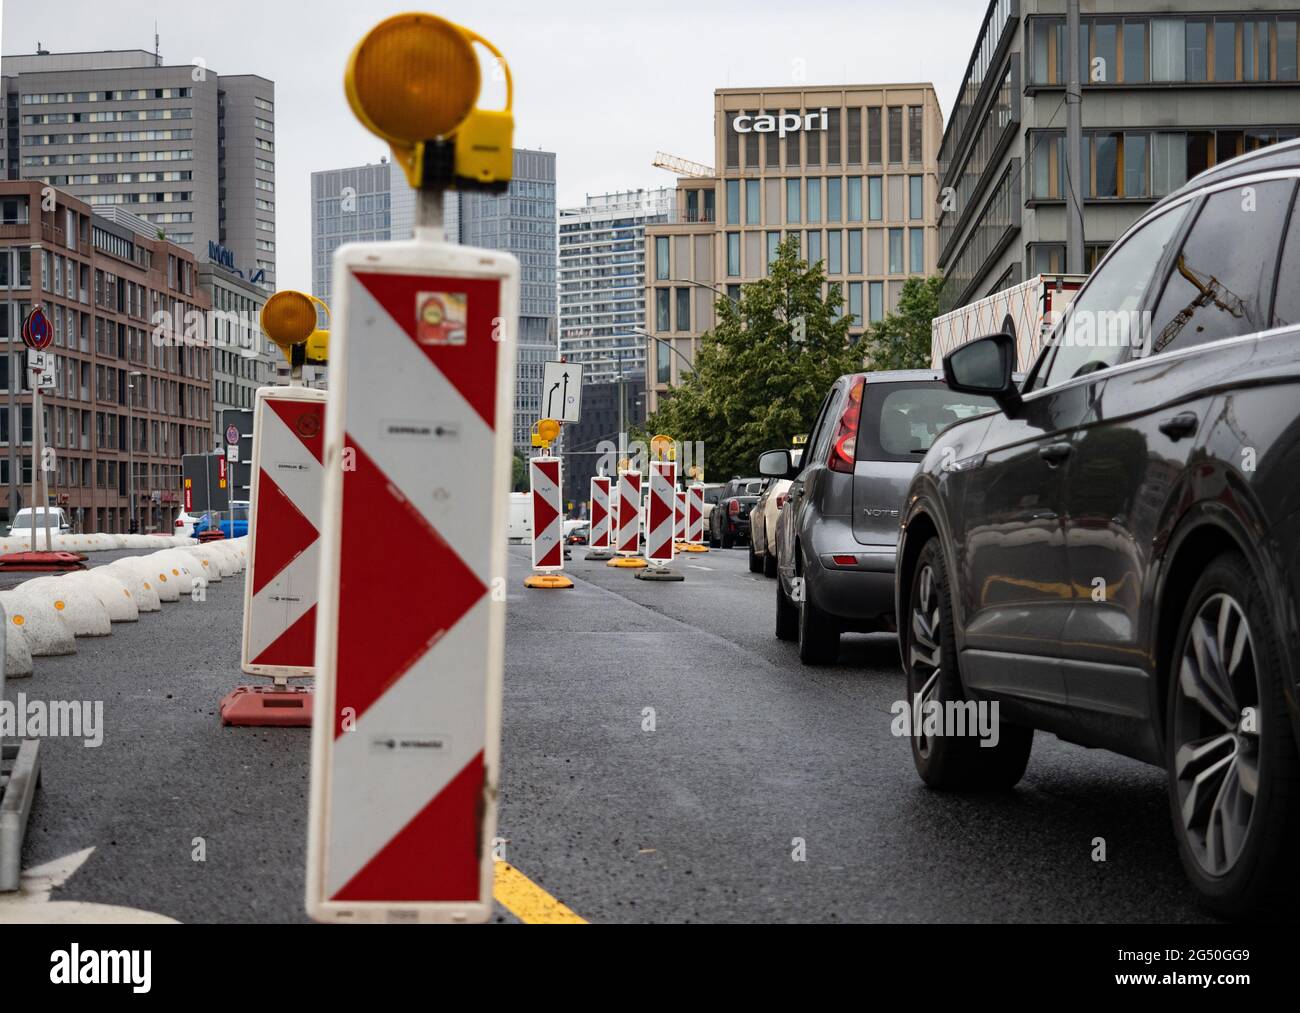 Berlin, Germany. 24th June, 2021. Vehicles stand close together on the Mühlendamm bridge. During an inspection of the structure, severe damage has been discovered. The damage would require "immediate safety measures", the traffic information center (VIZ) announced on Thursday morning. Therefore, until further notice, only the bus lane on Mühlendamm in the direction of Potsdamer Platz is available for all motor vehicle traffic, it added. In the morning, there were already traffic obstructions around the bridge. Credit: Paul Zinken/dpa-Zentralbild/dpa/Alamy Live News Stock Photo